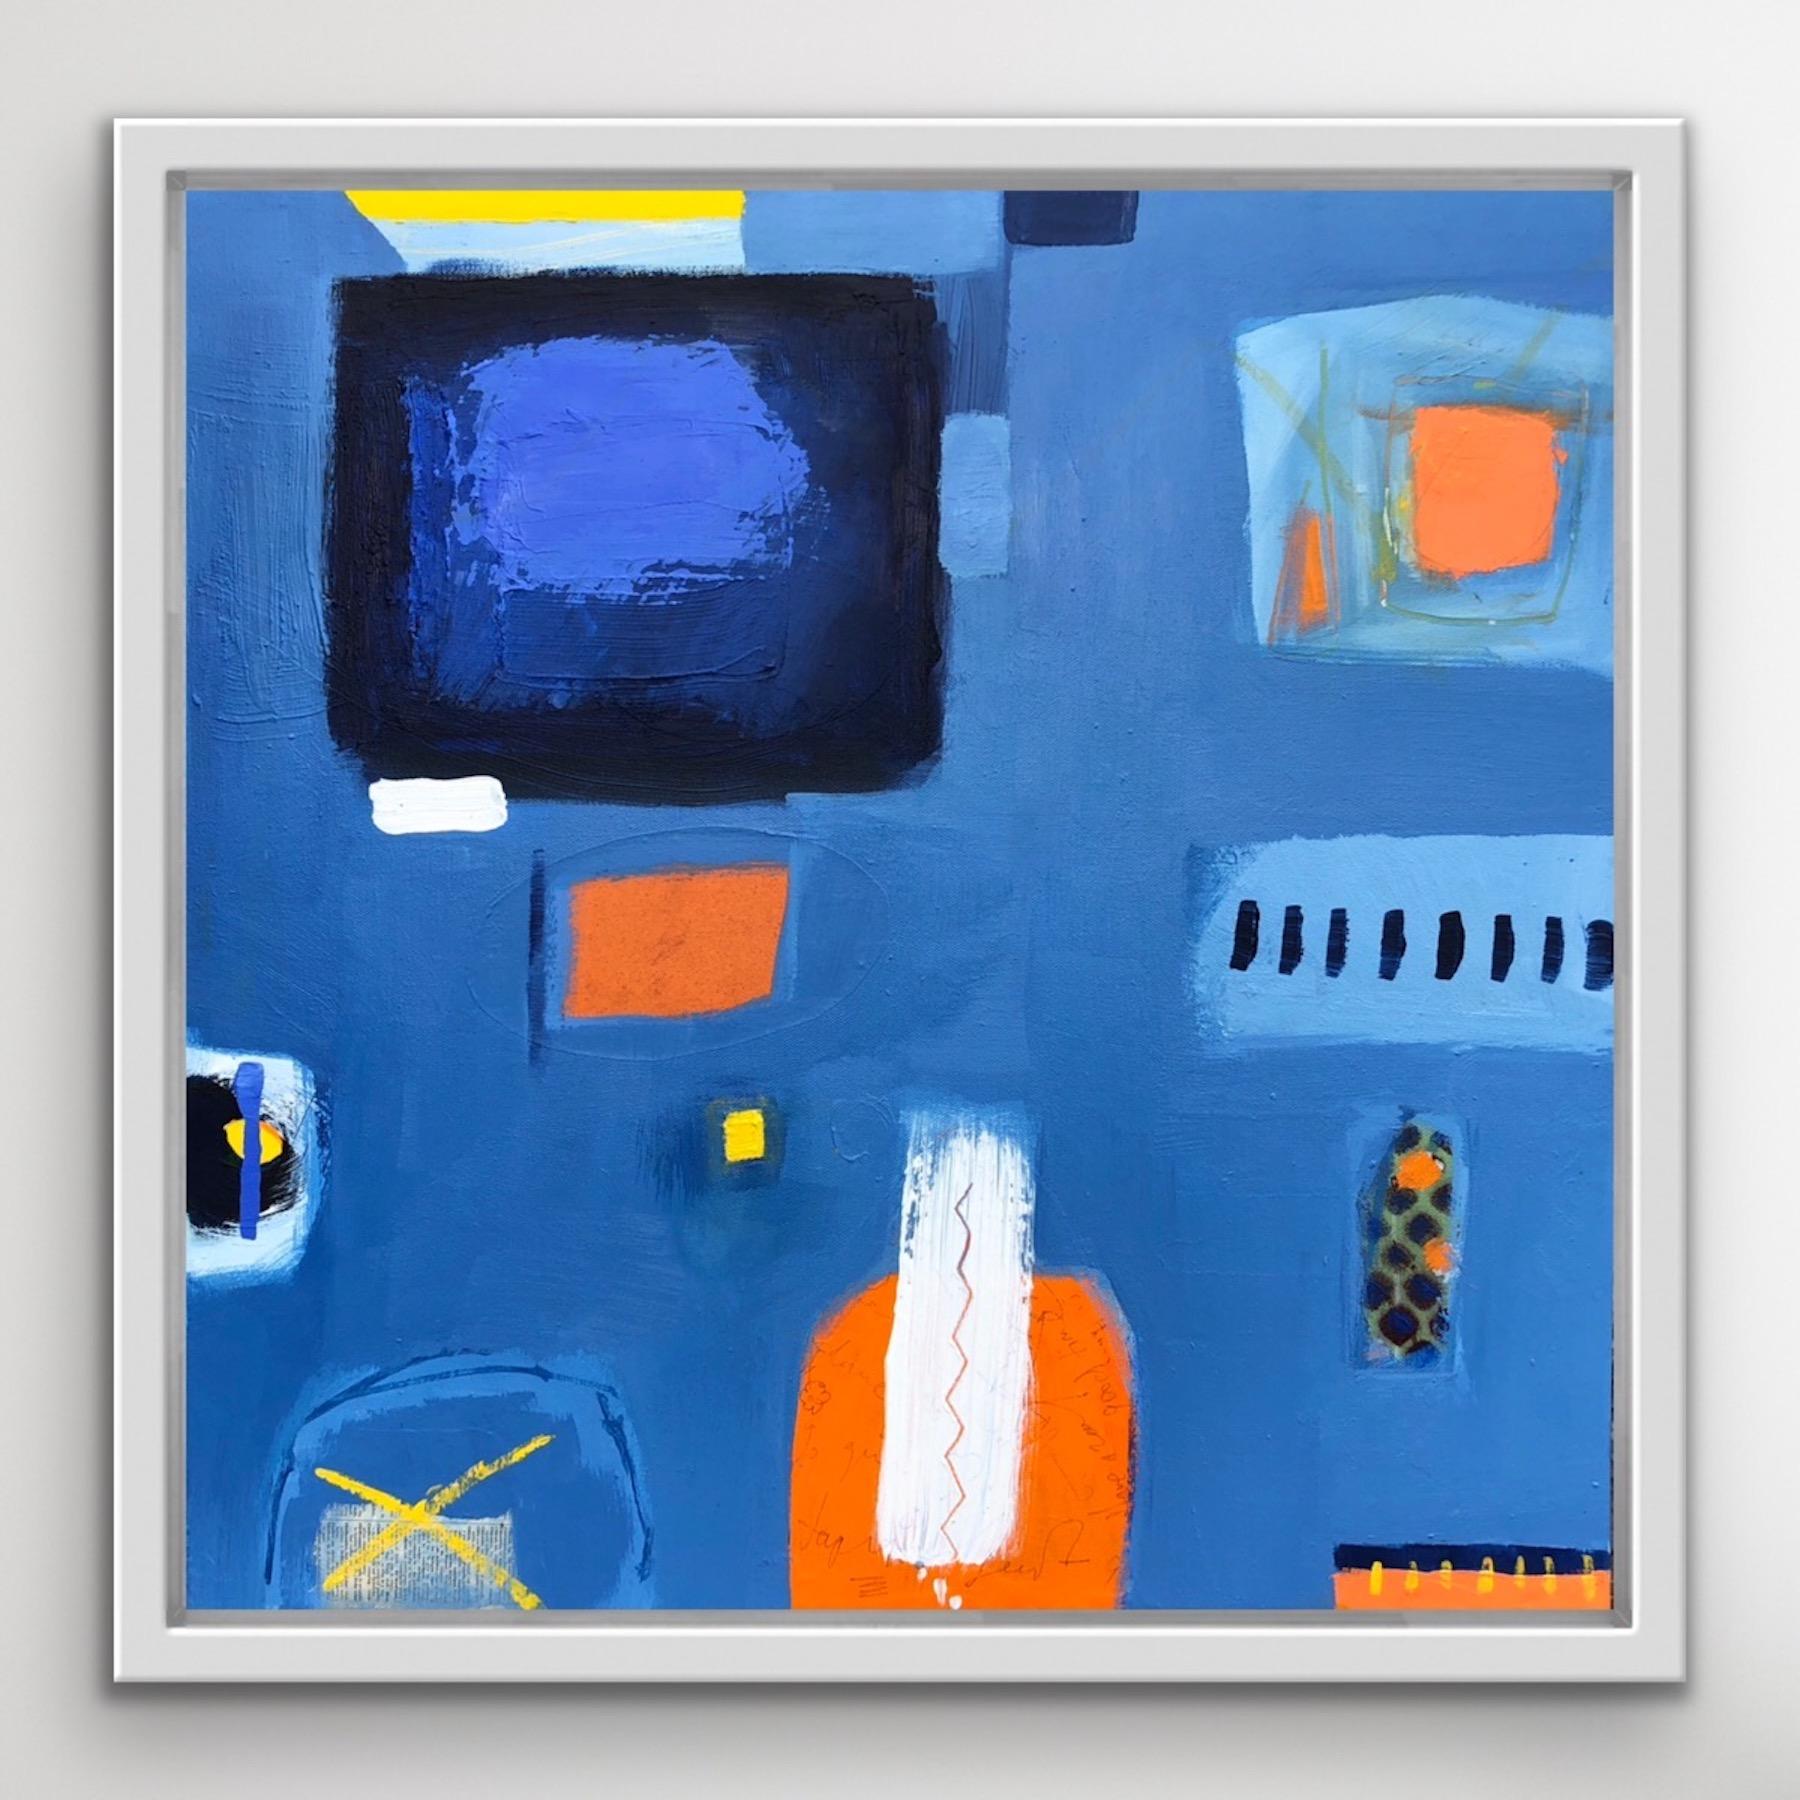 The inspiration and ideas behind this piece of work , came from a dream which featured an orange square motif. The blues are a mixture of Prussian blue, ultramarine, and cerulean. The work is acrylic on canvas , with areas of cold wax oil paint,